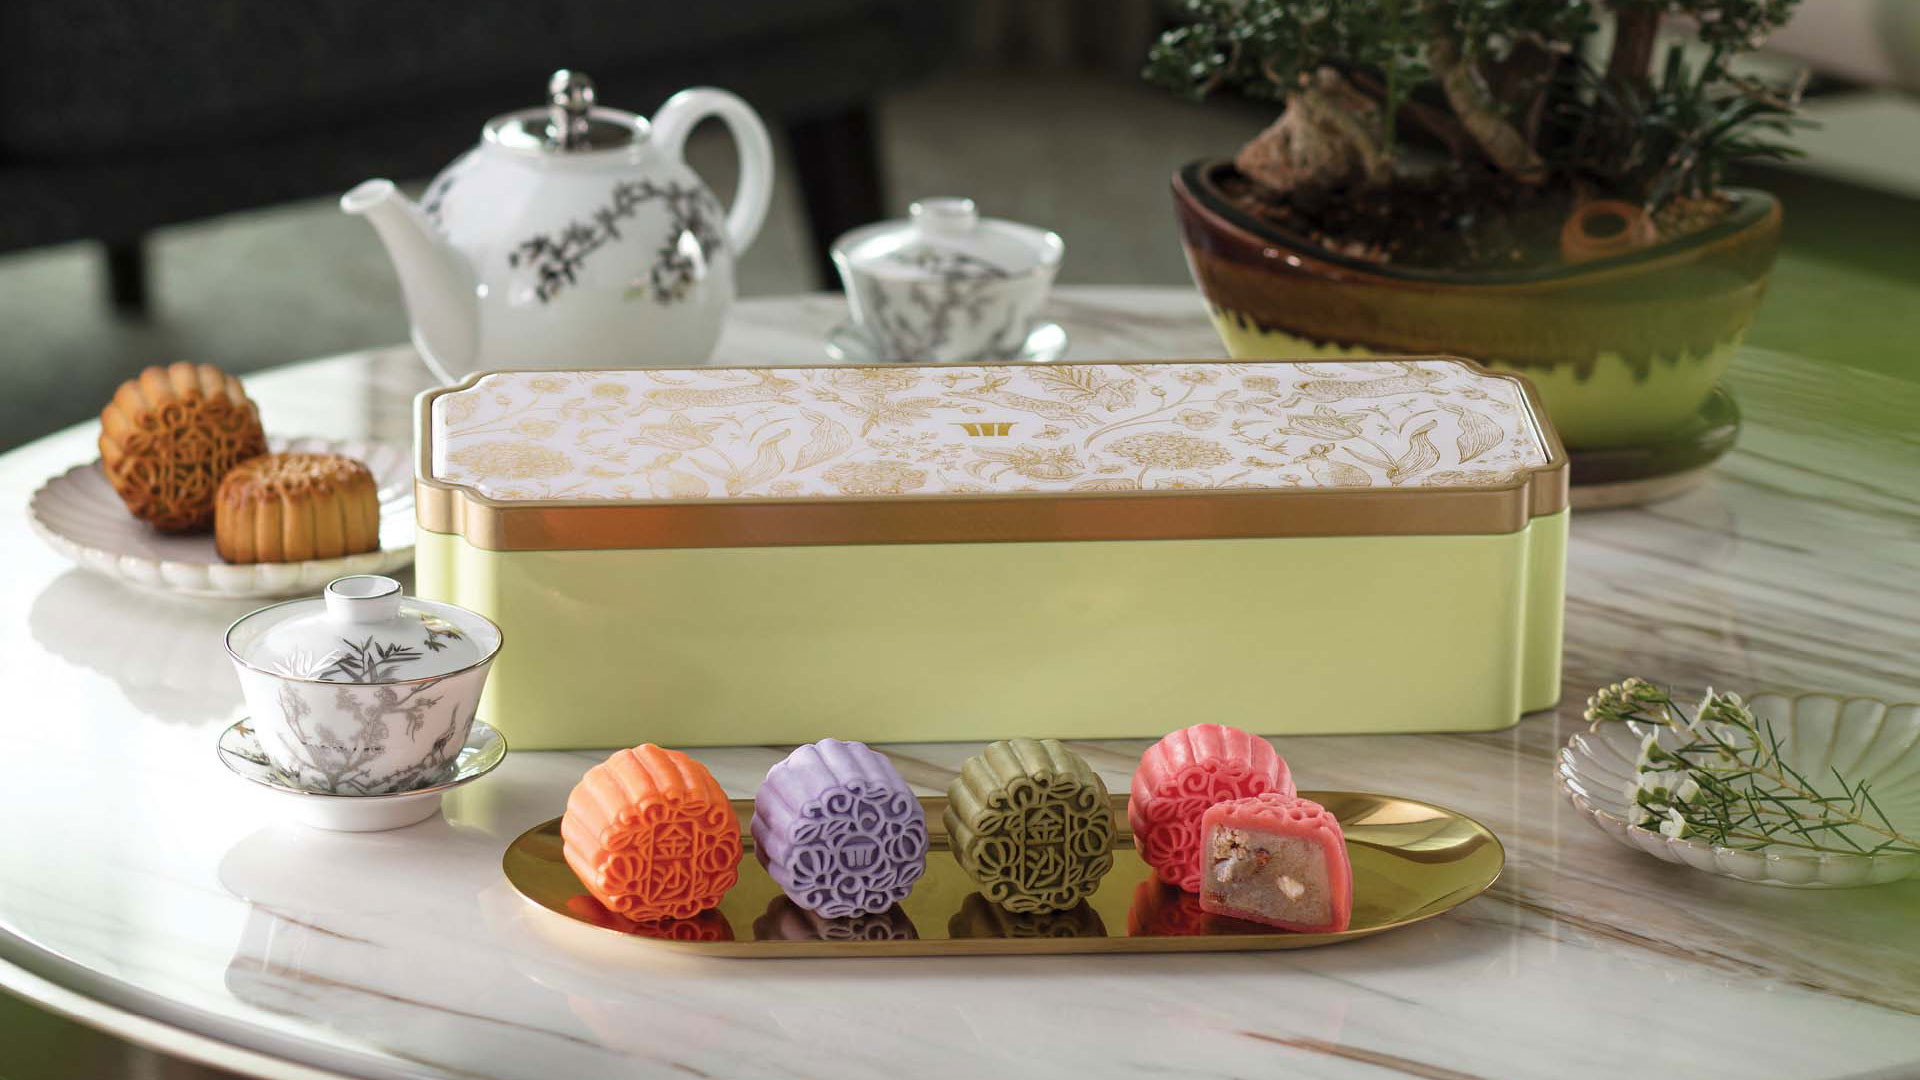 Snowskin mooncakes from 5 star hotel in Singapore, Marina Bay Sands